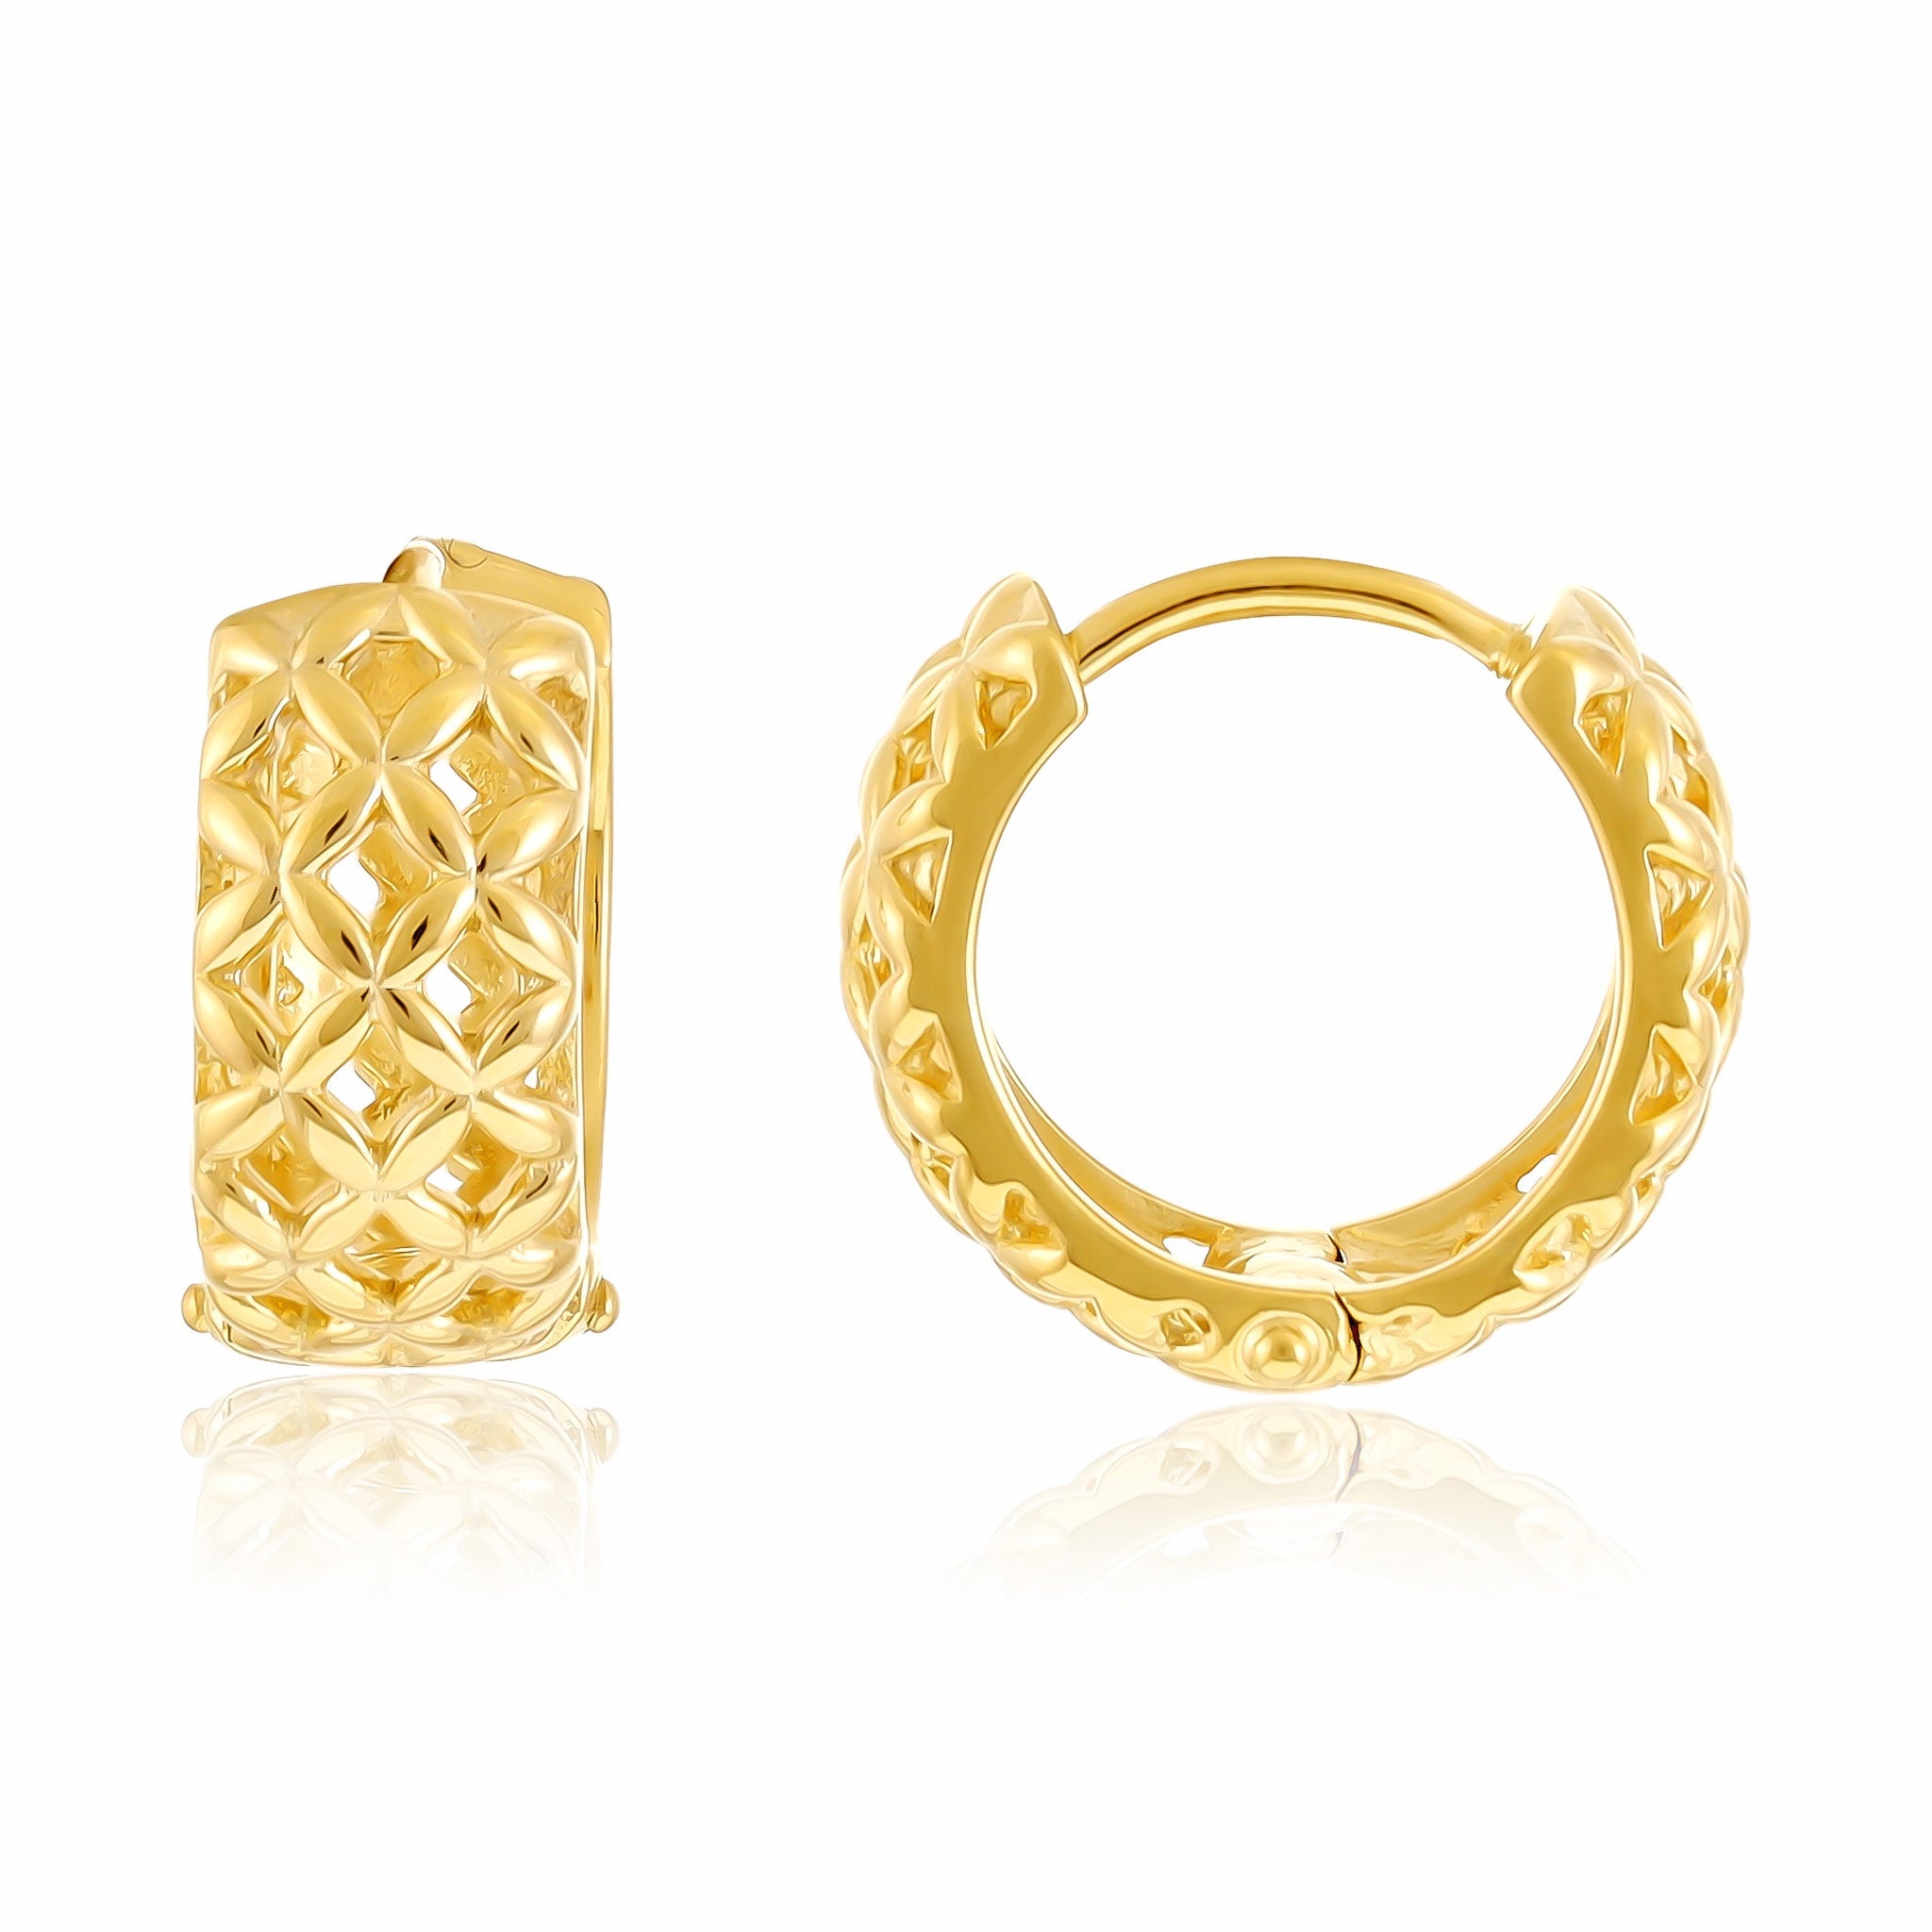 18ct 1 micron gold plated lattice effect earrings PER3012 - FJewellery